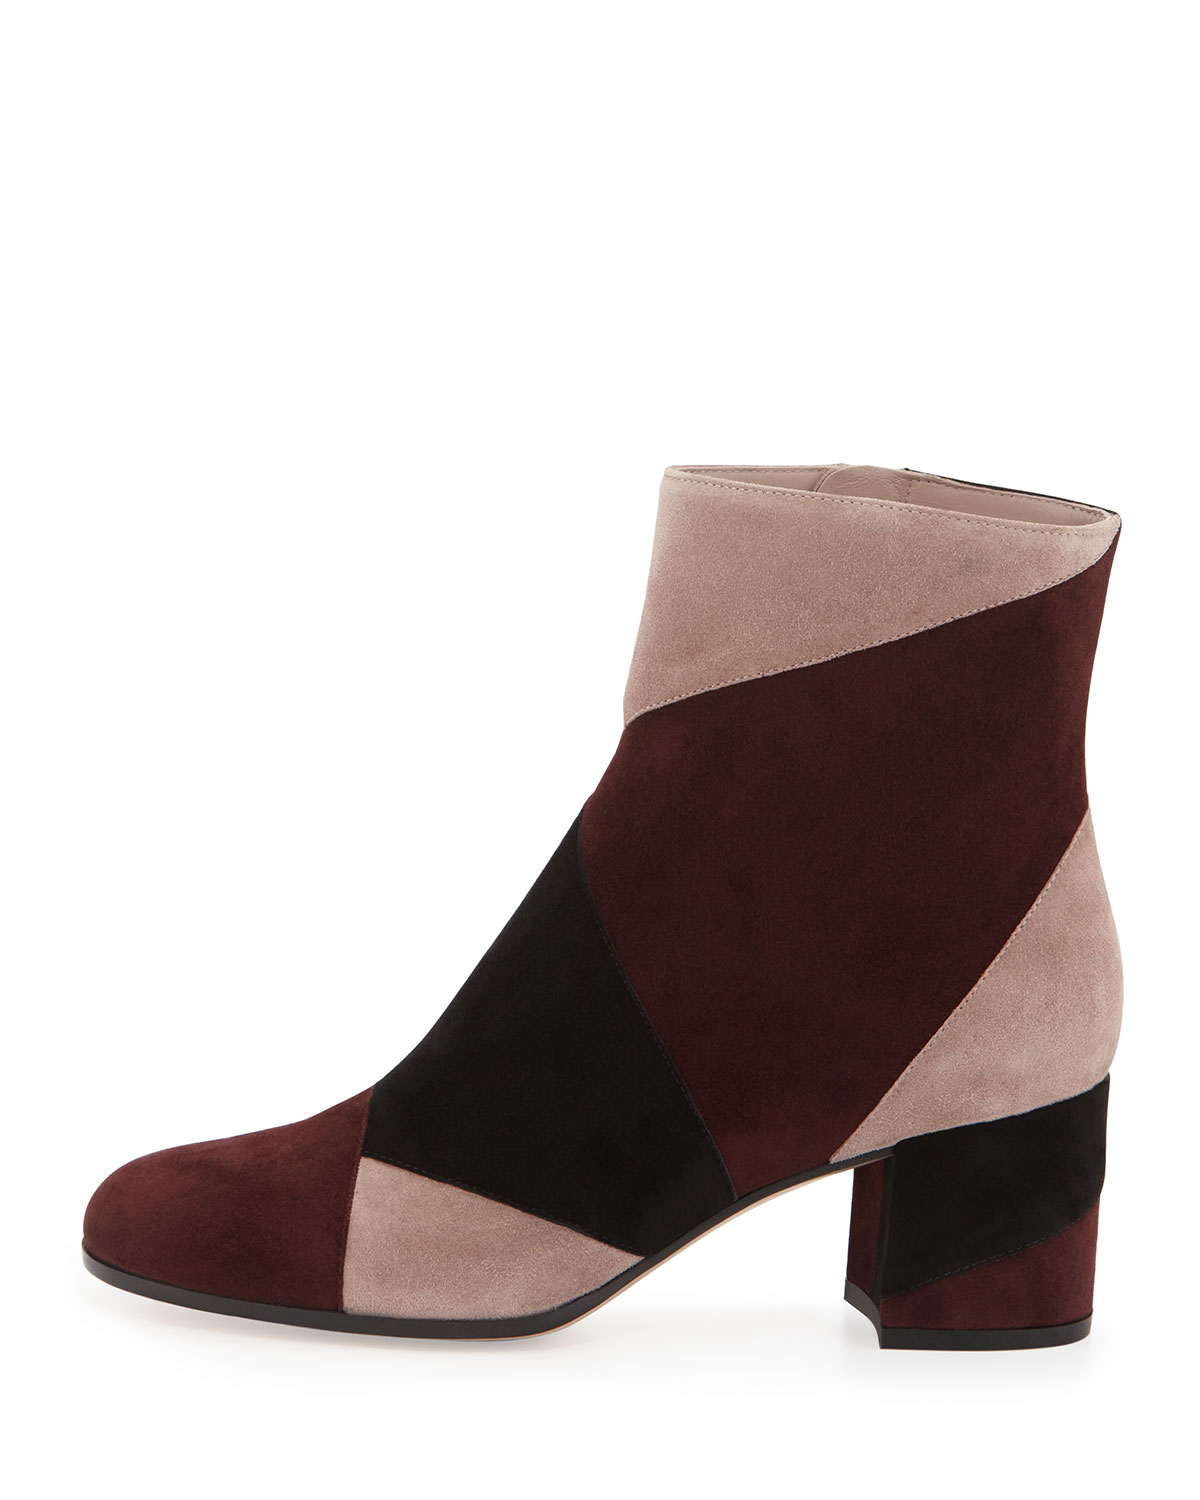 Gianvito Rossi Patchwork Suede Ankle Boot - Lyst